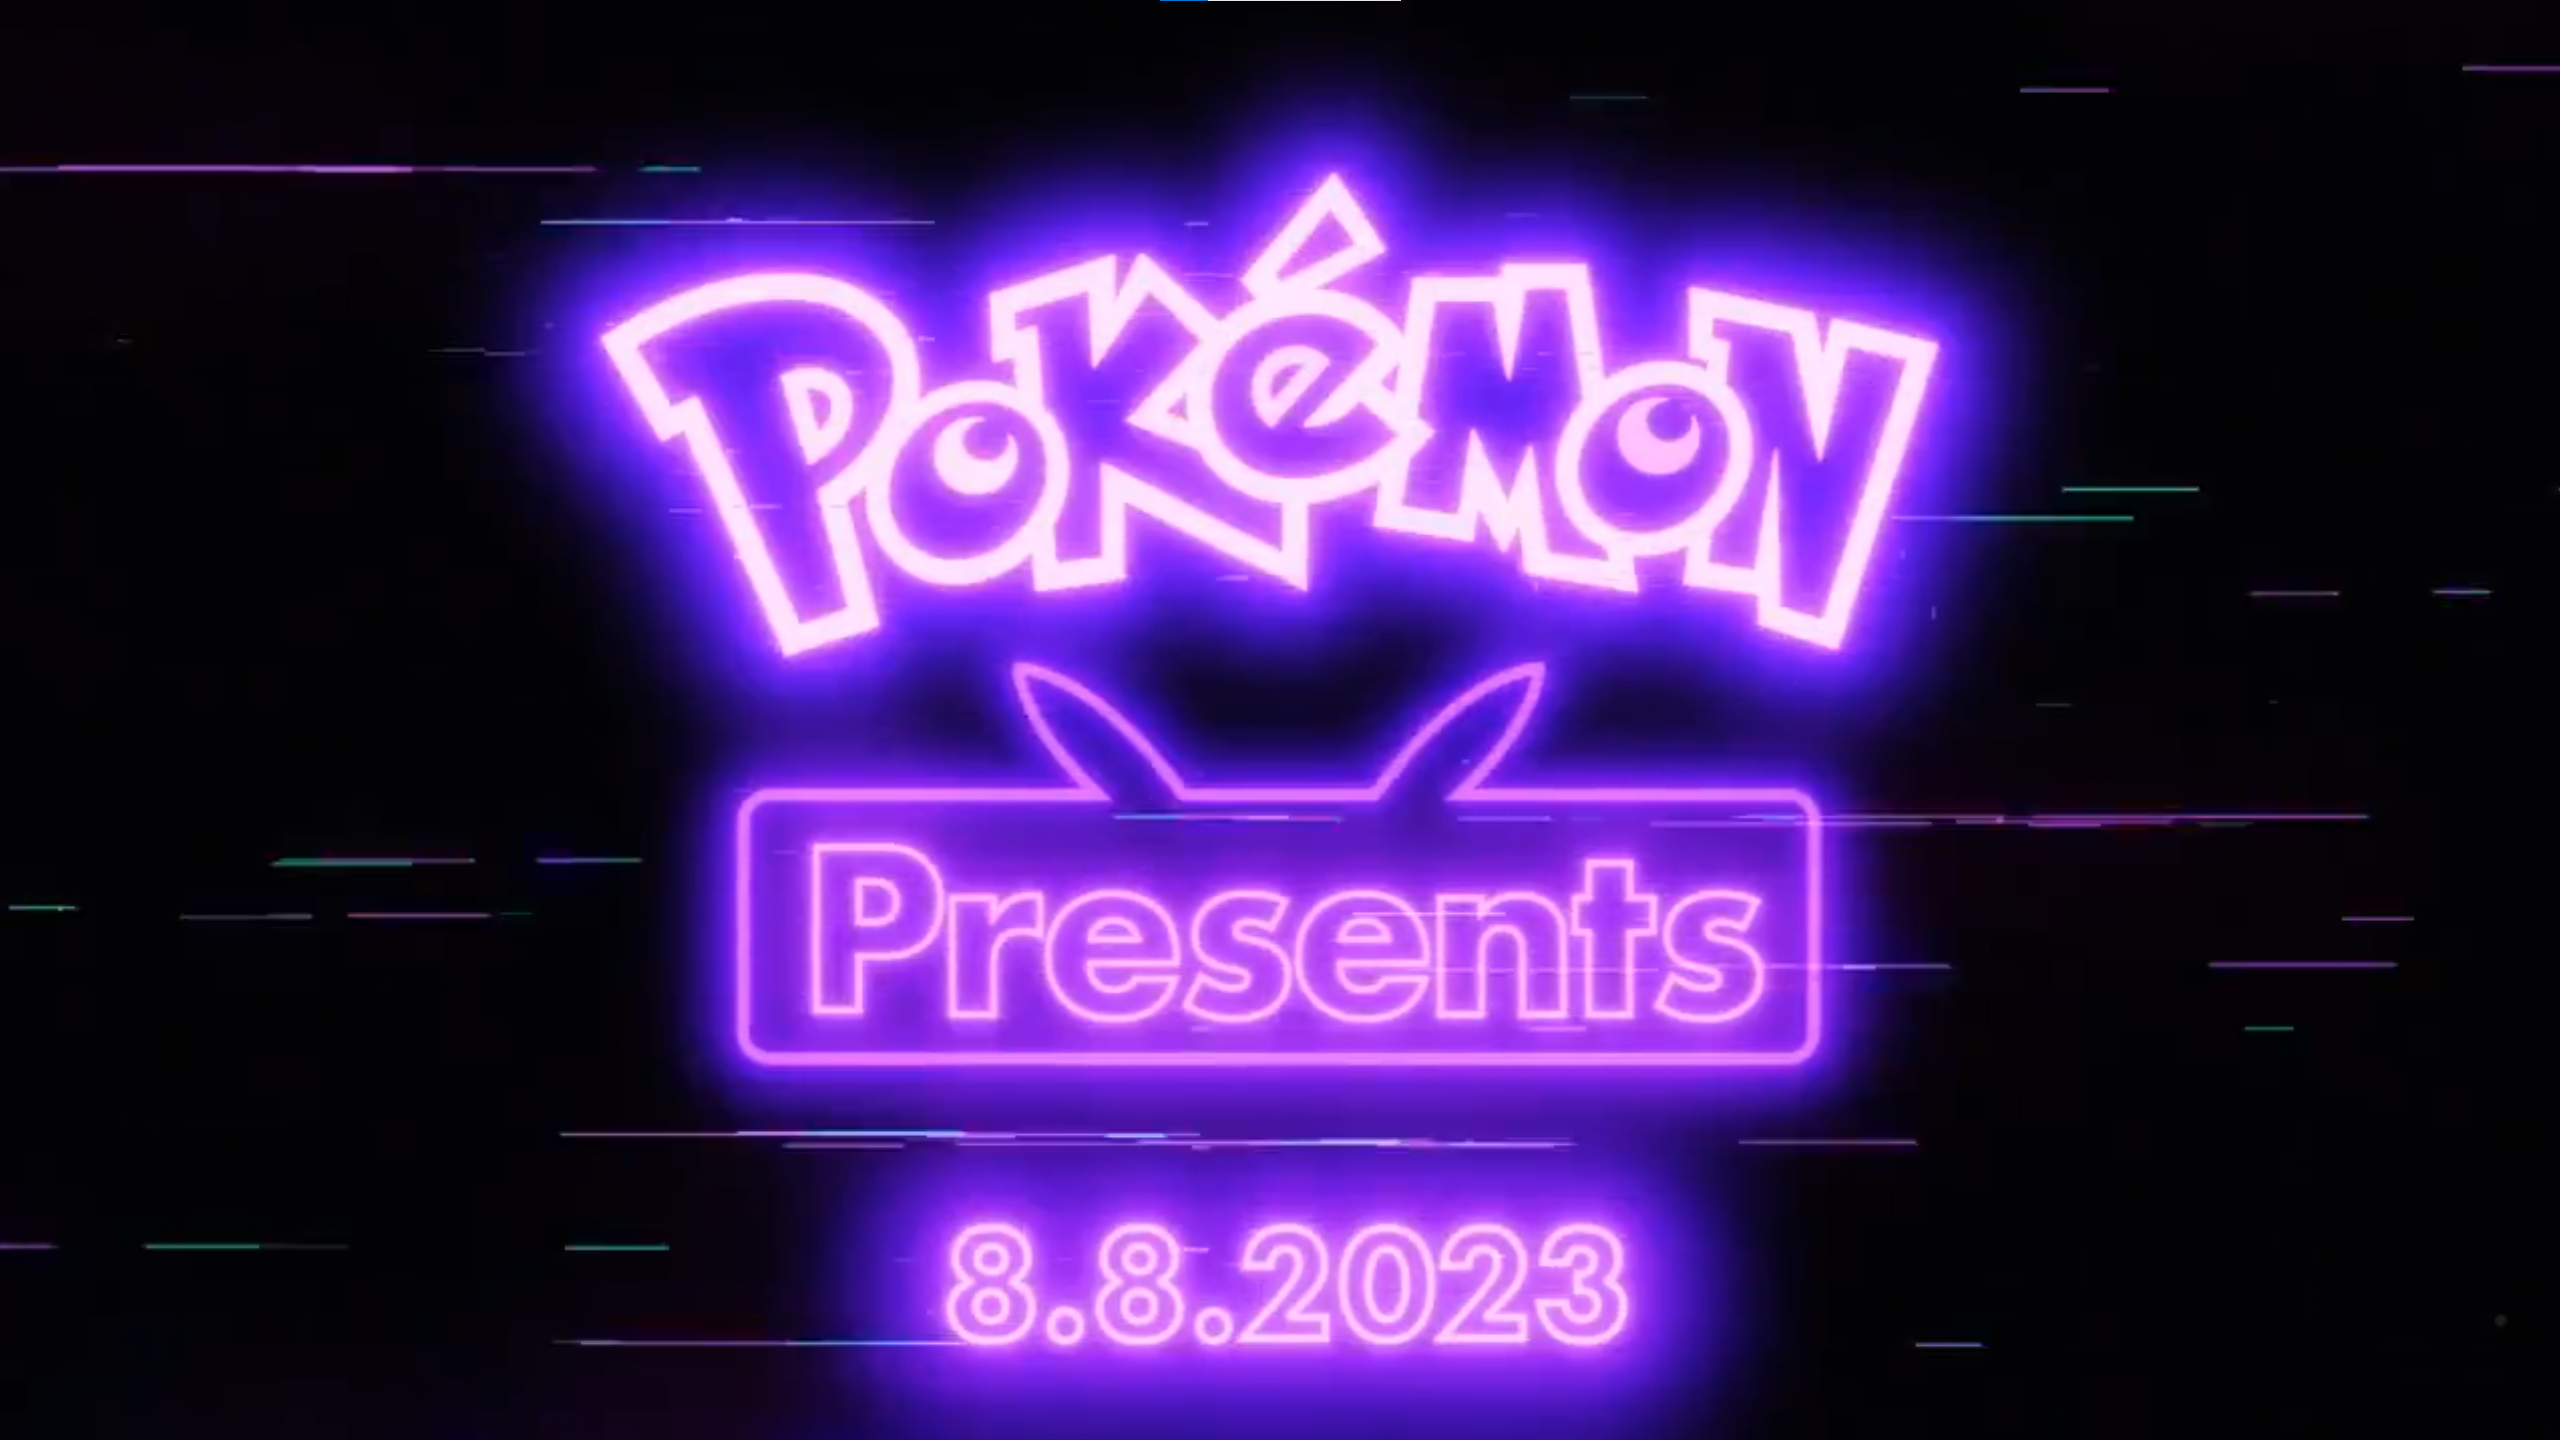 An advertisement for the Pokémon Presents on a black background with neon purple lettering